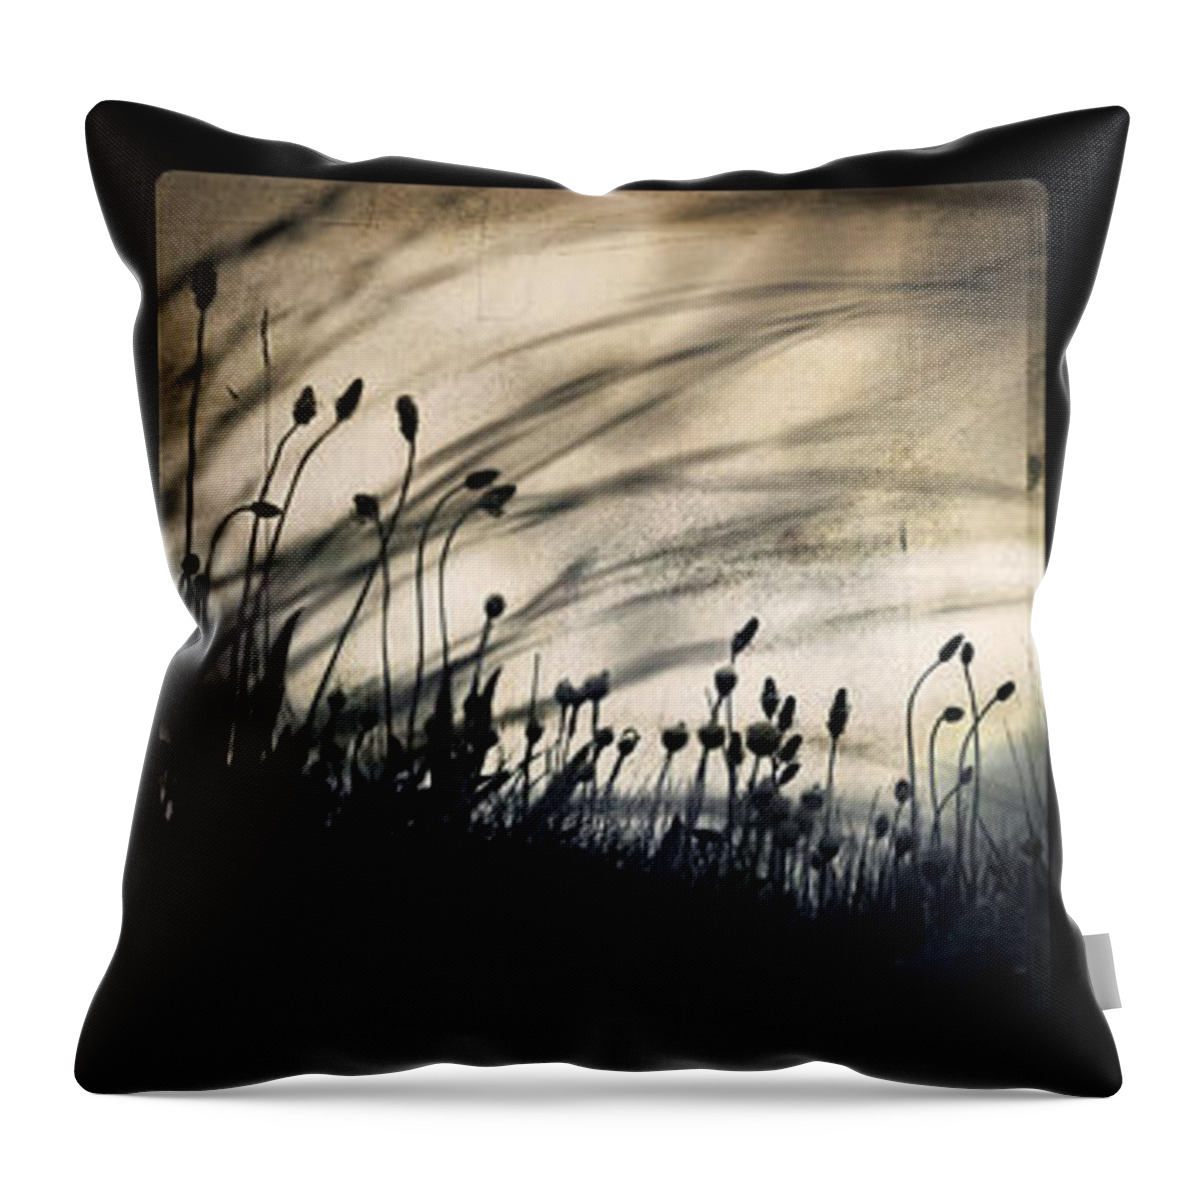 Grass Mood Triptych Wild Art Fineart Dorit Nature Throw Pillow featuring the photograph Wild Things by Dorit Fuhg